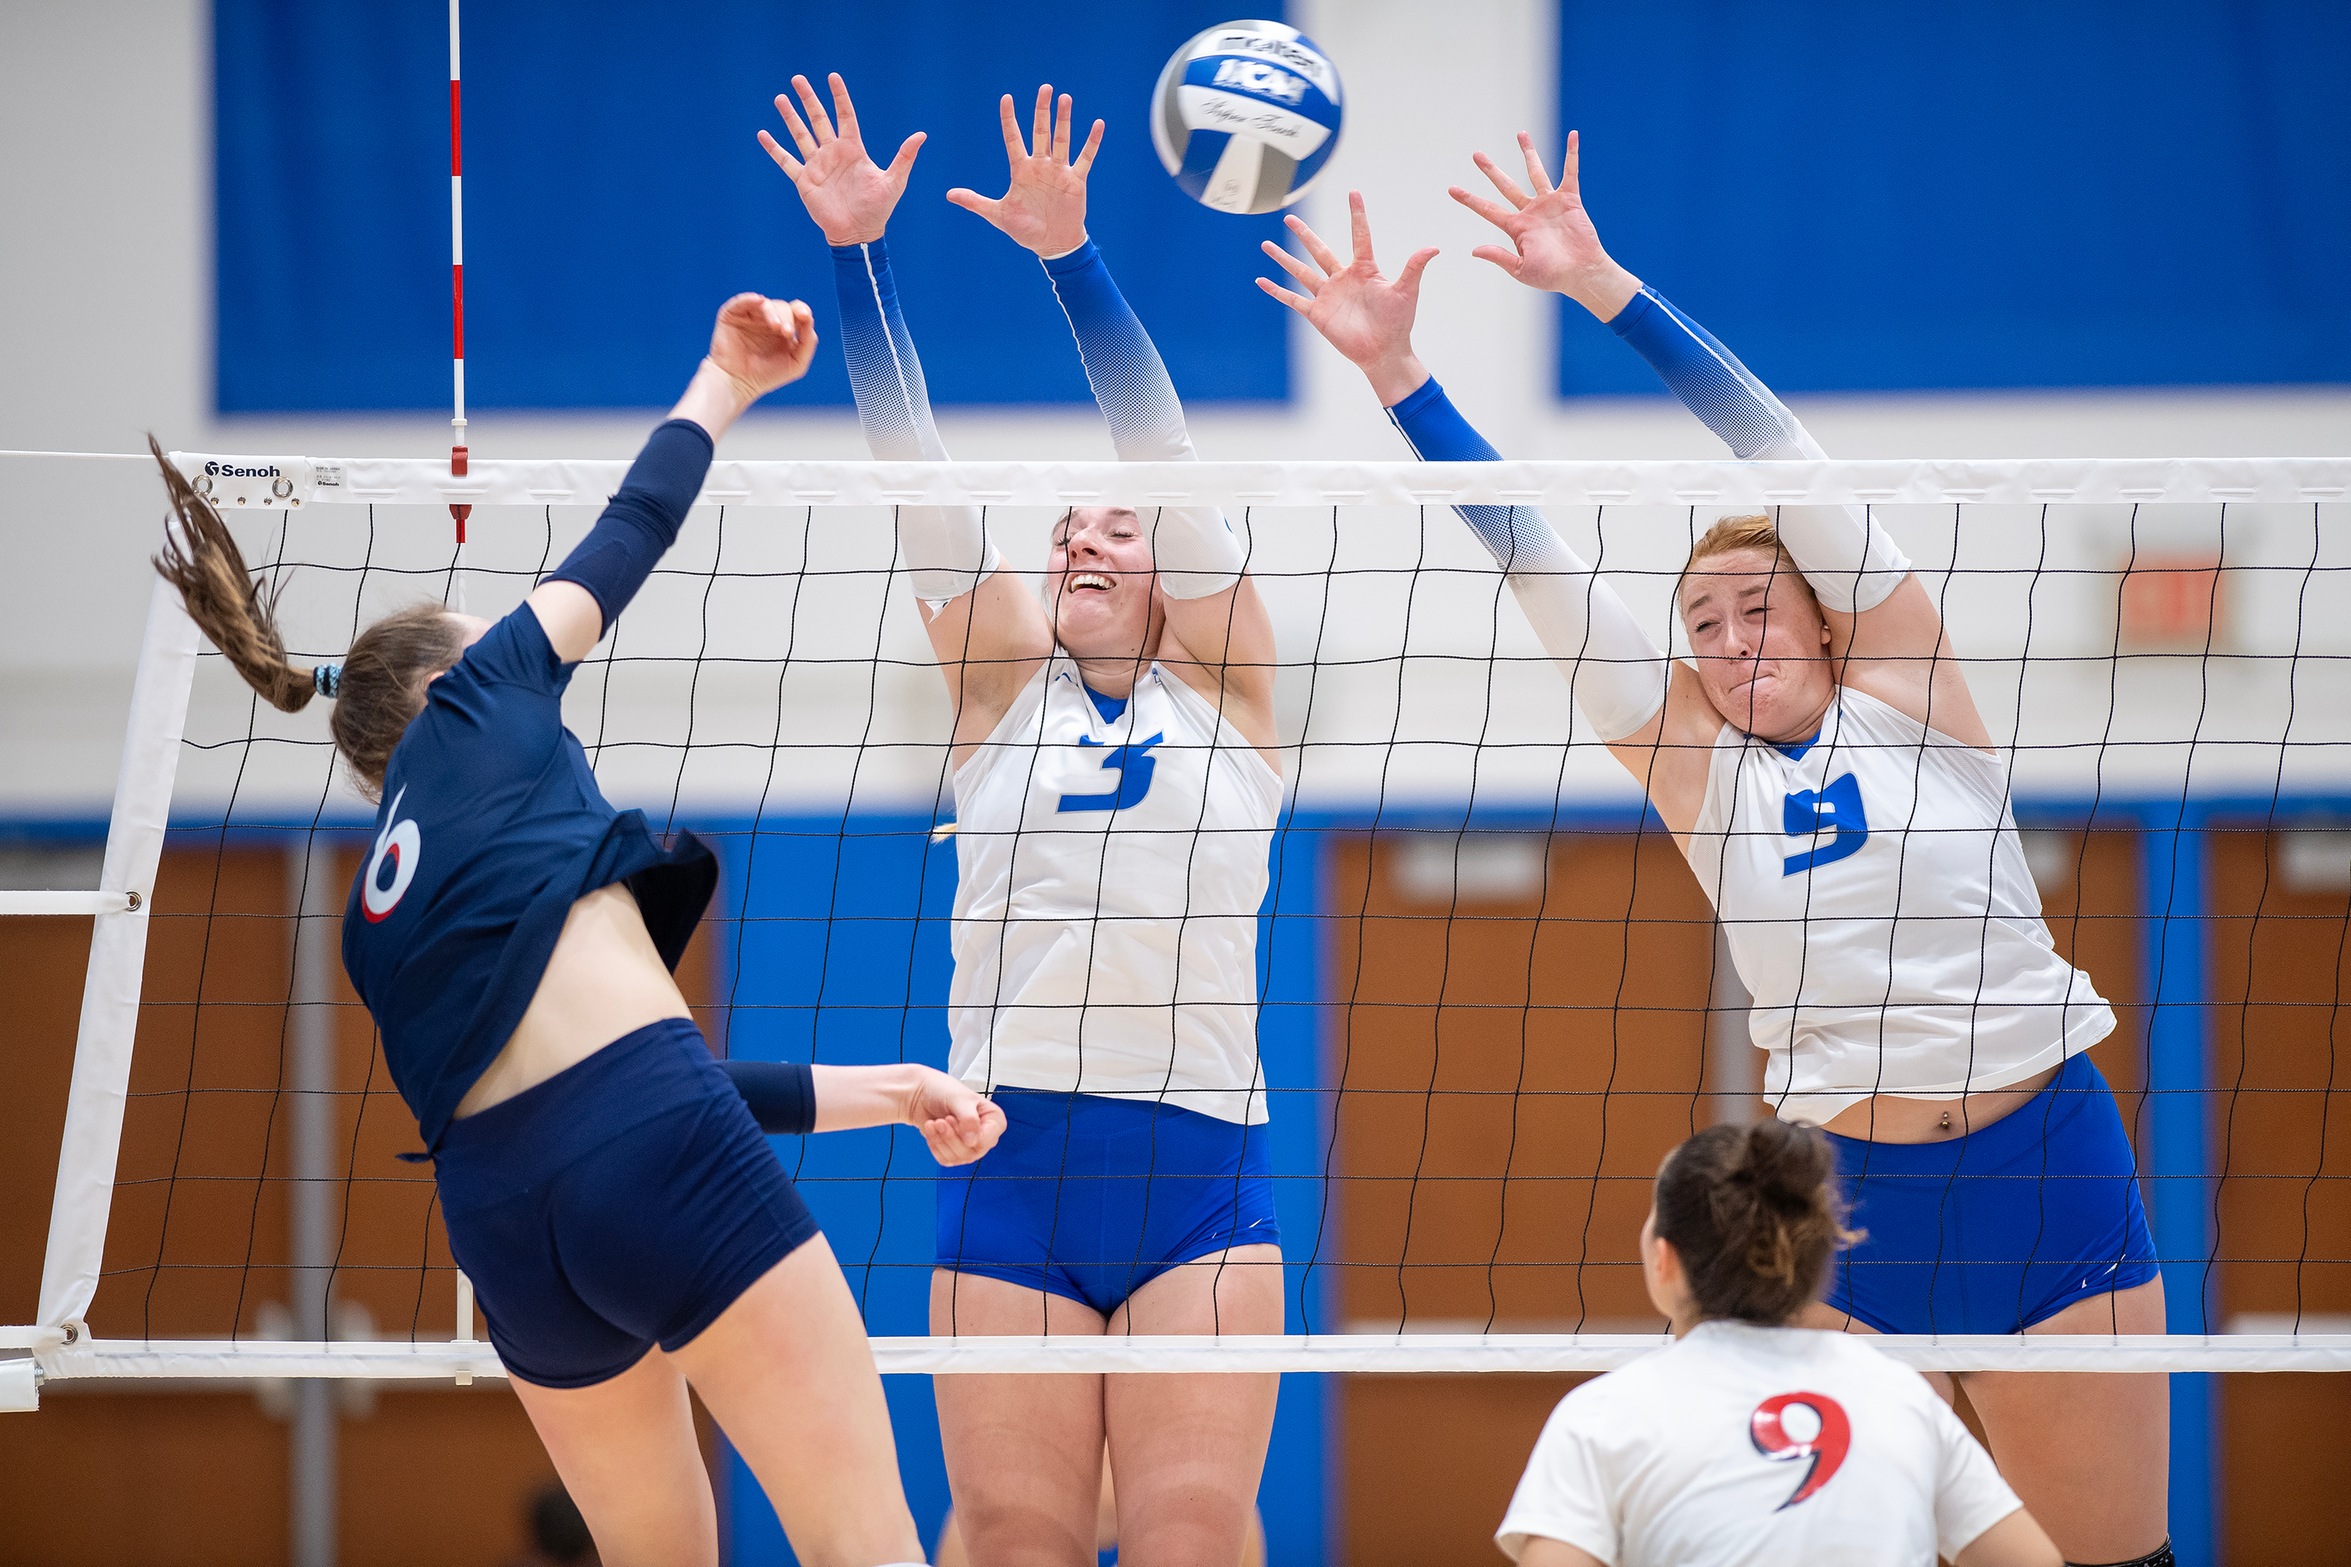 Mia Lombardo and Isabelle Roufs led CCSU with 9 kills each (Steve McLaughlin Photography)